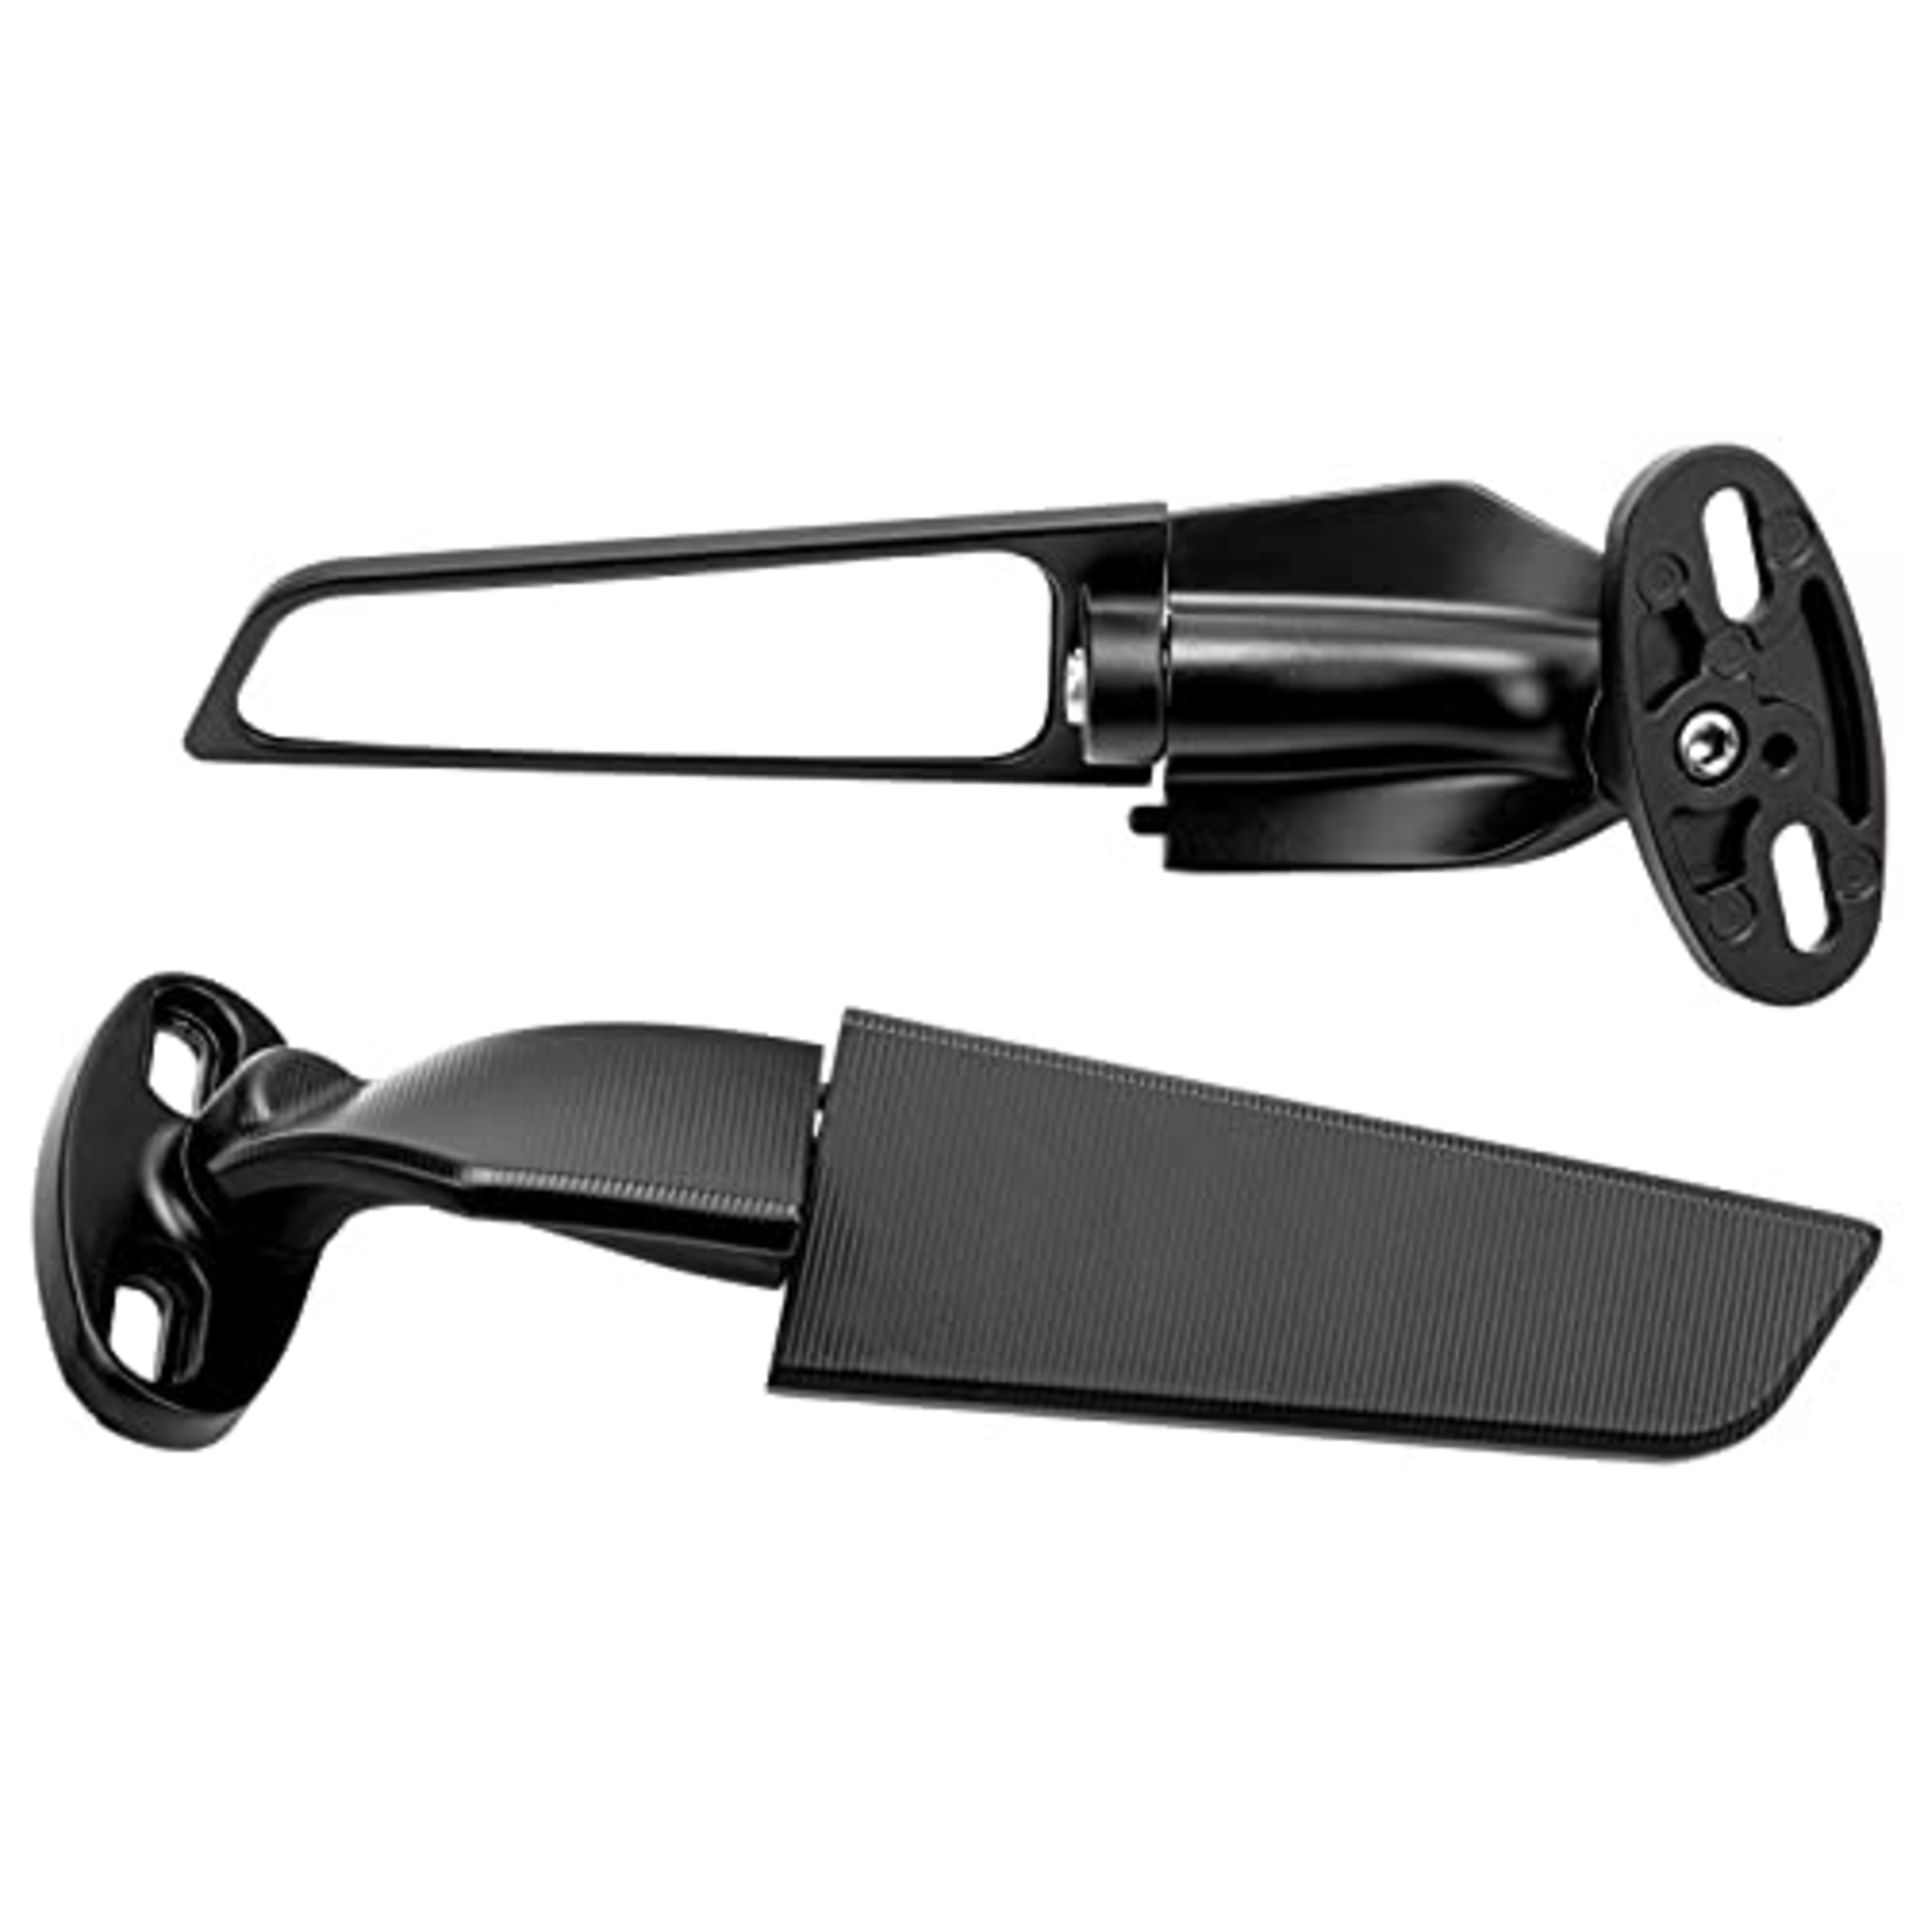 SUCIE 2Pcs Modified Motorcycle Wing Rearview Mirrors, Adjustable Rotating Side Mirrors